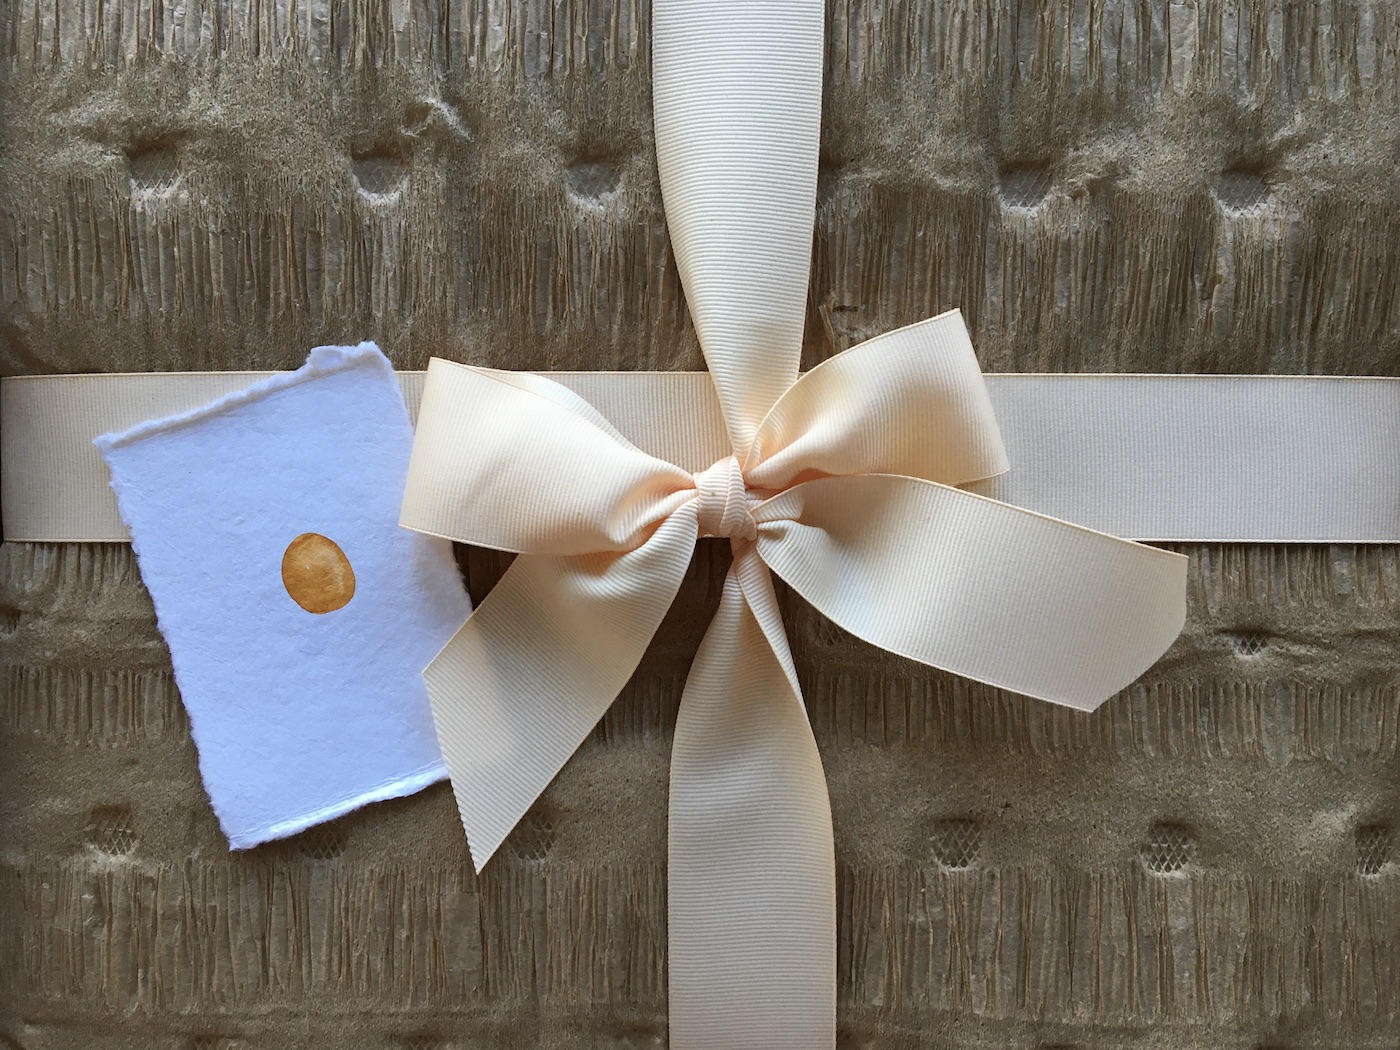 Unwrapped package with notecard